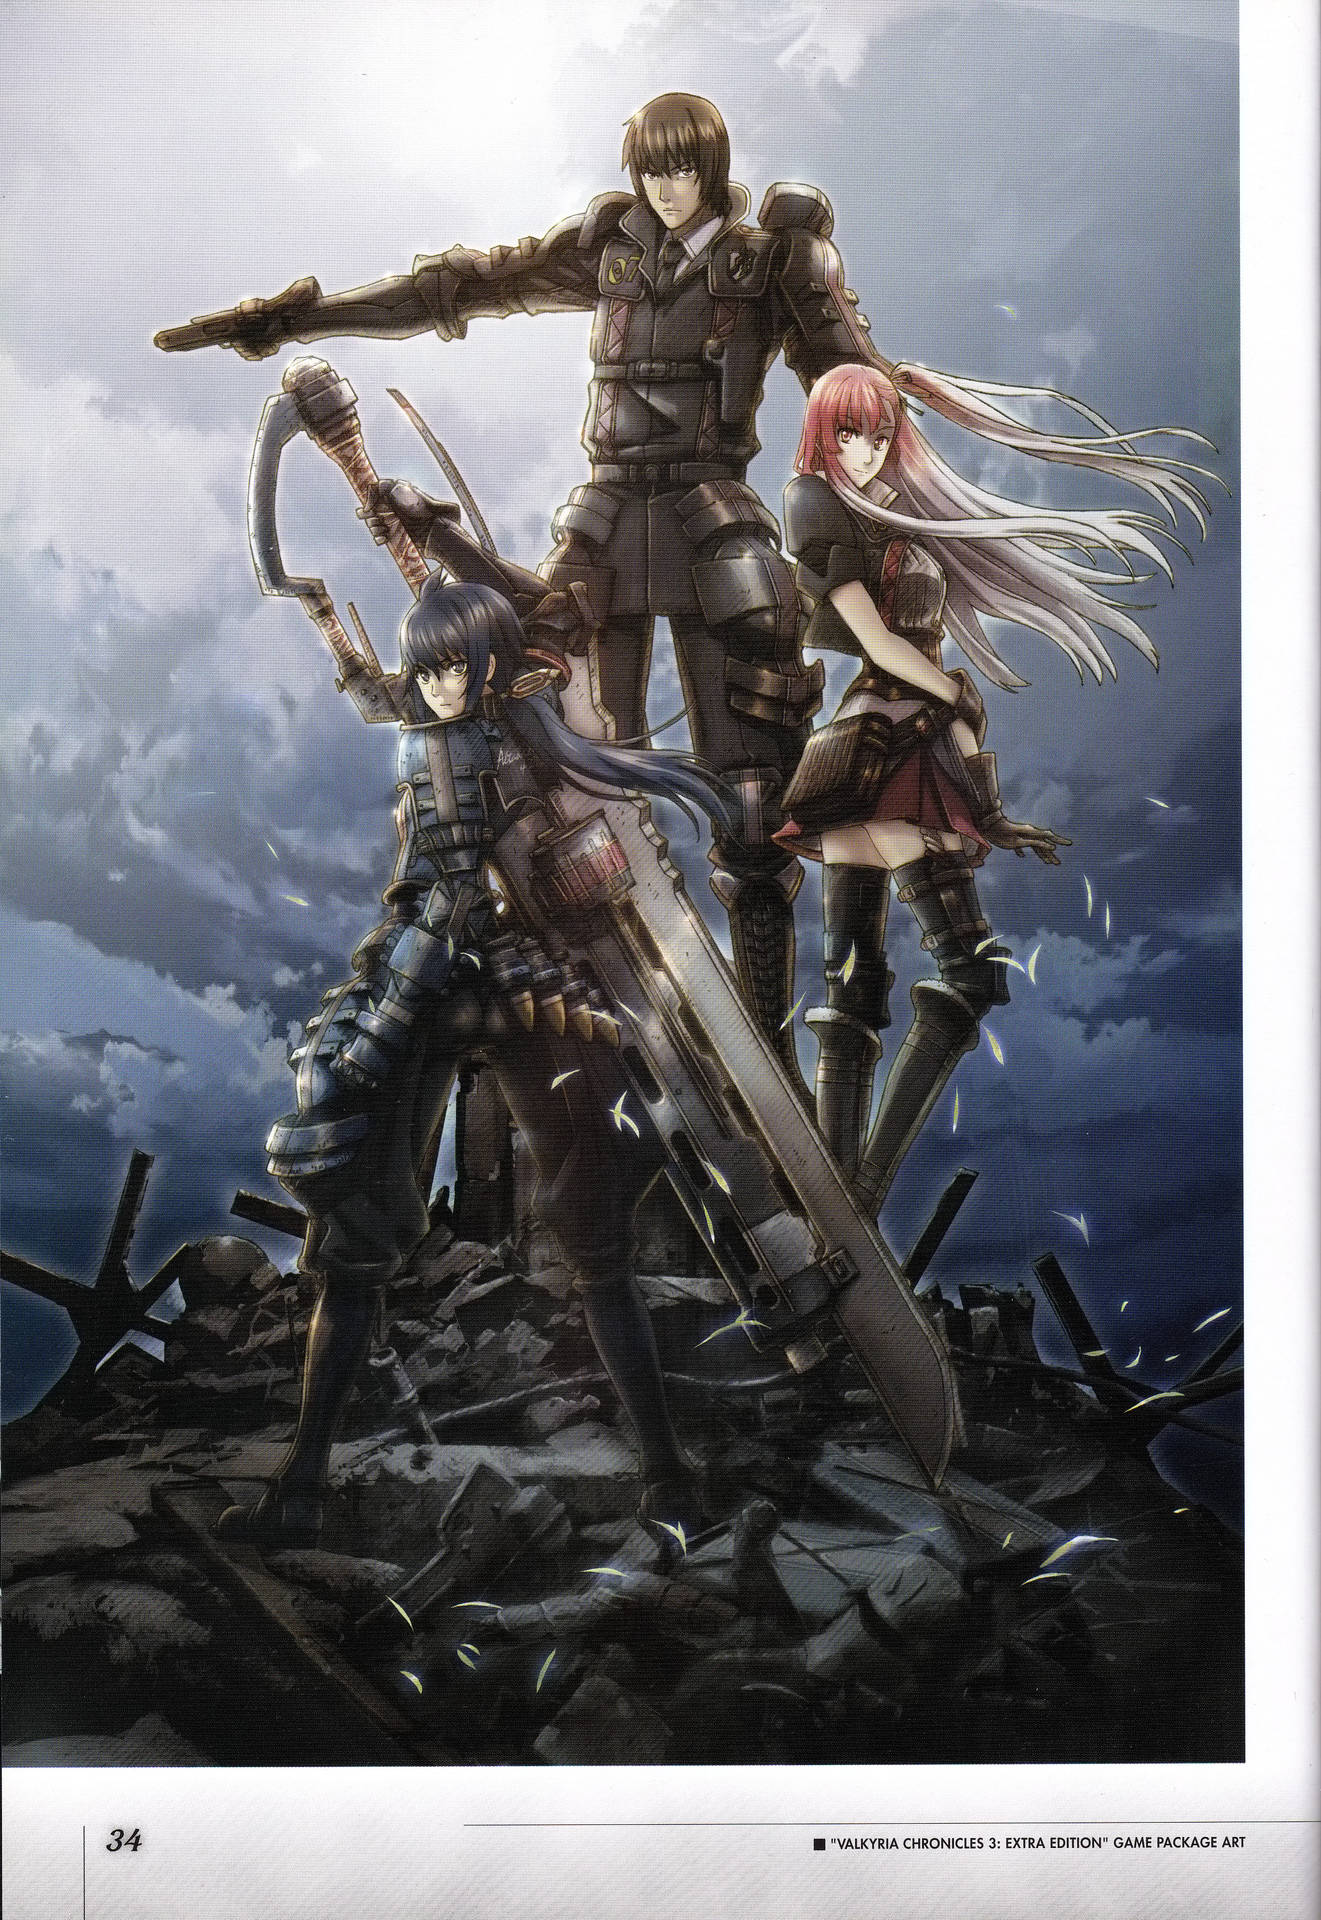 Fantastic Valkyria Chronicles Poster Background